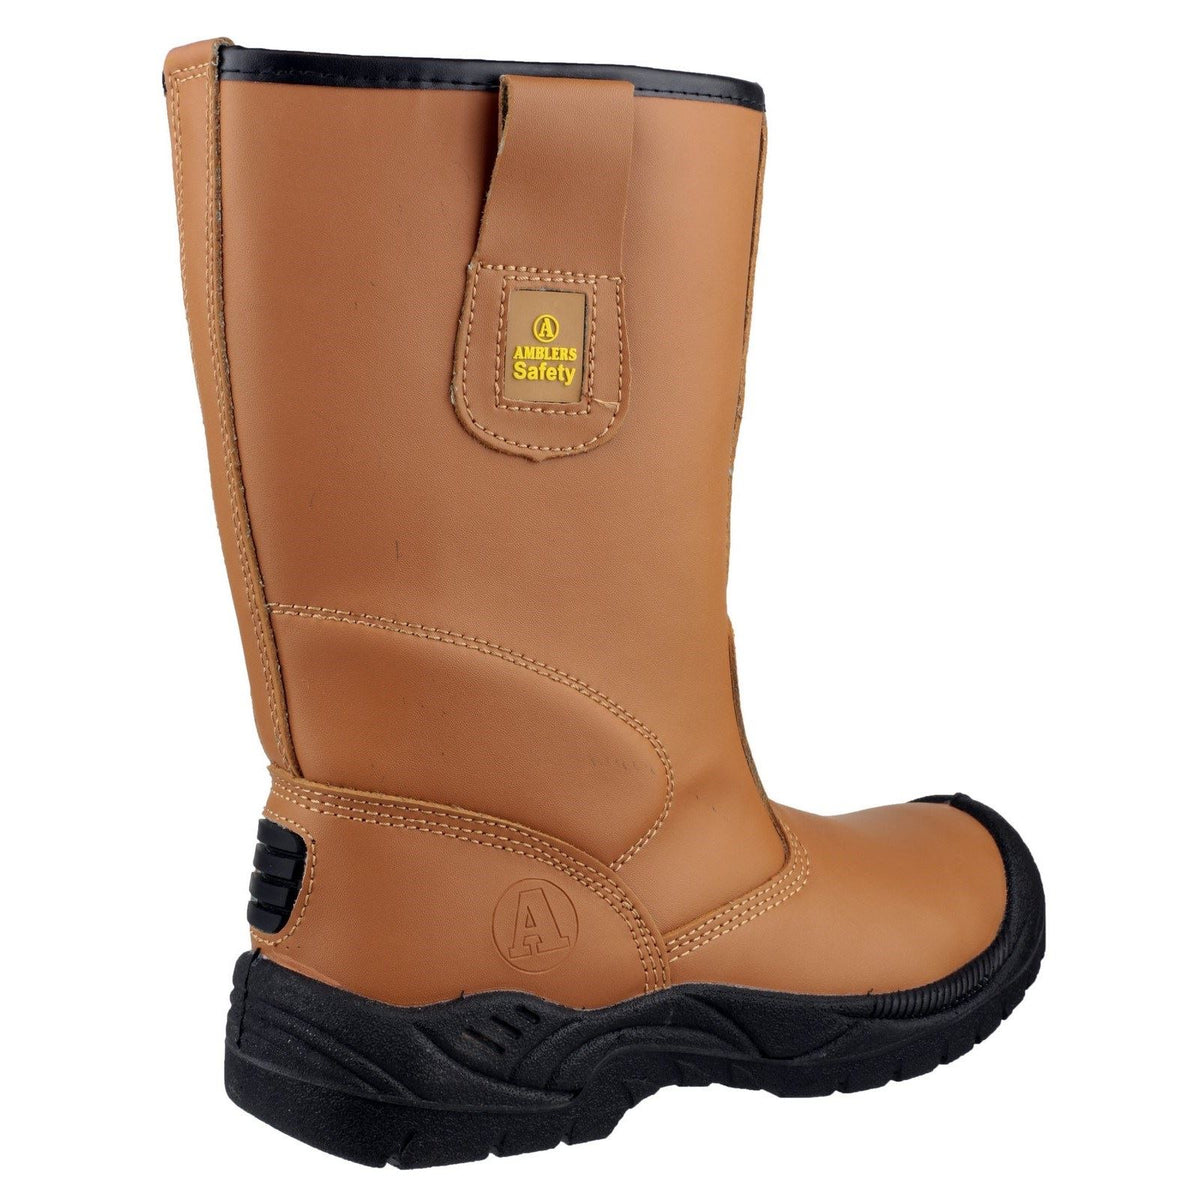 Amblers Safety FS142 Water Resistant Pull On Safety Rigger Boots